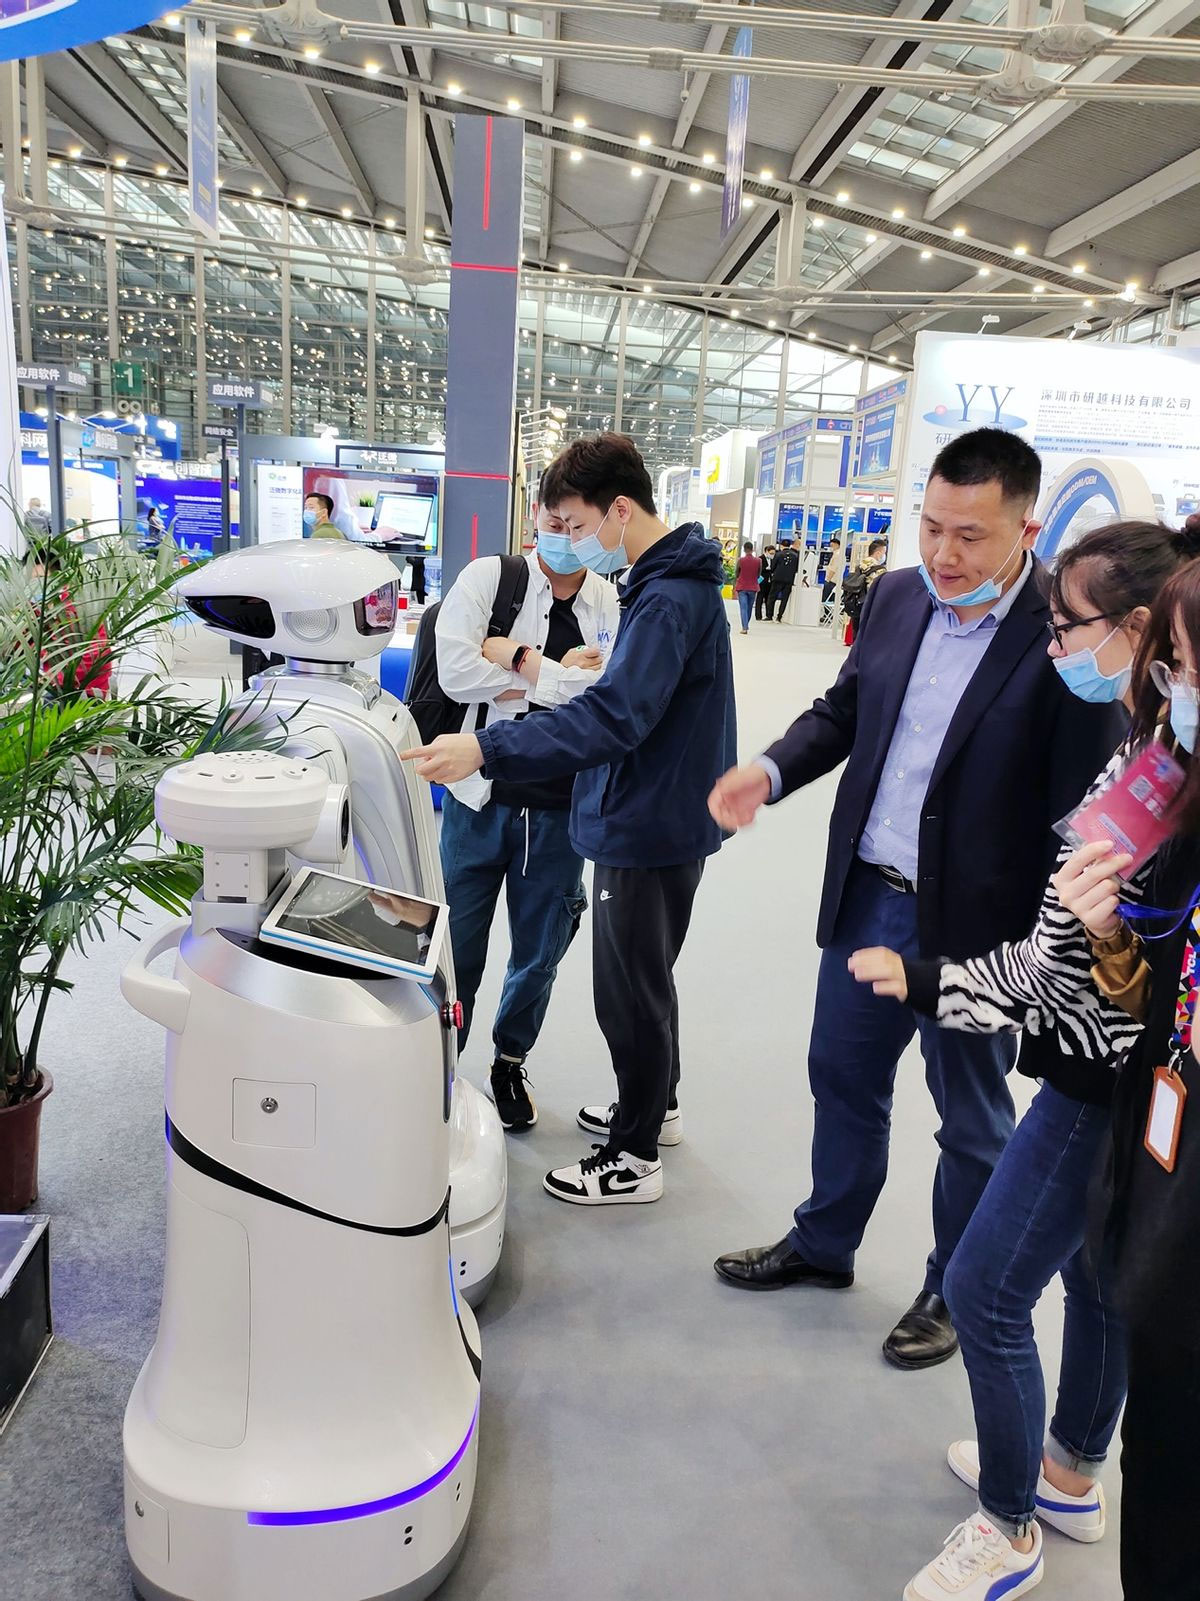 Iben Robot appeared in China electronic information exposition to promote industrial digitalization